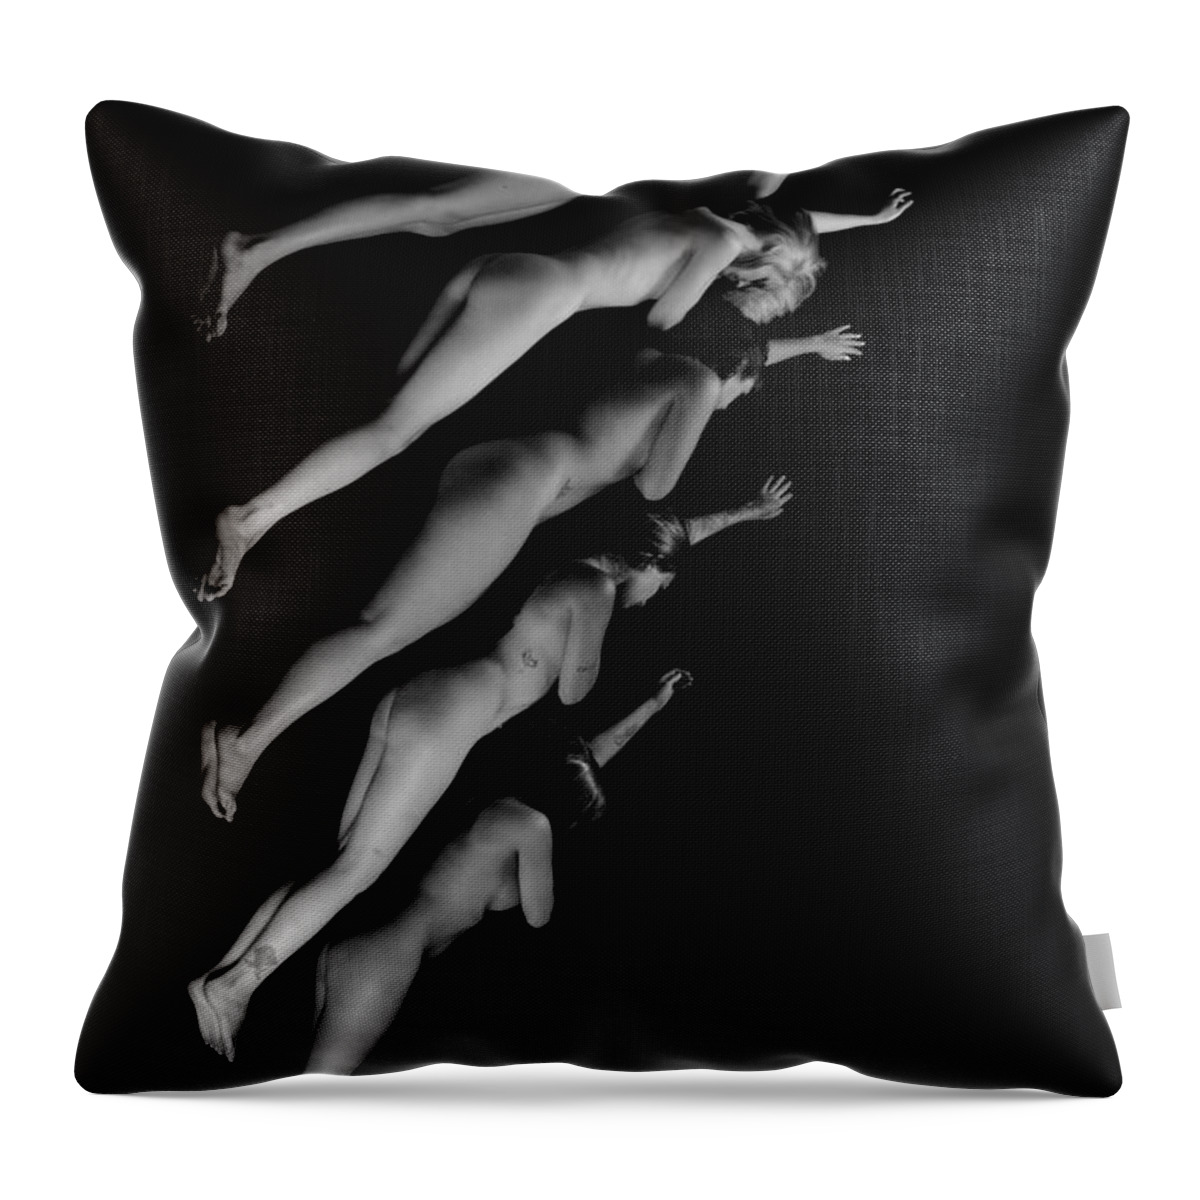 Artistic Photographs Throw Pillow featuring the photograph Falling Together by Robert WK Clark